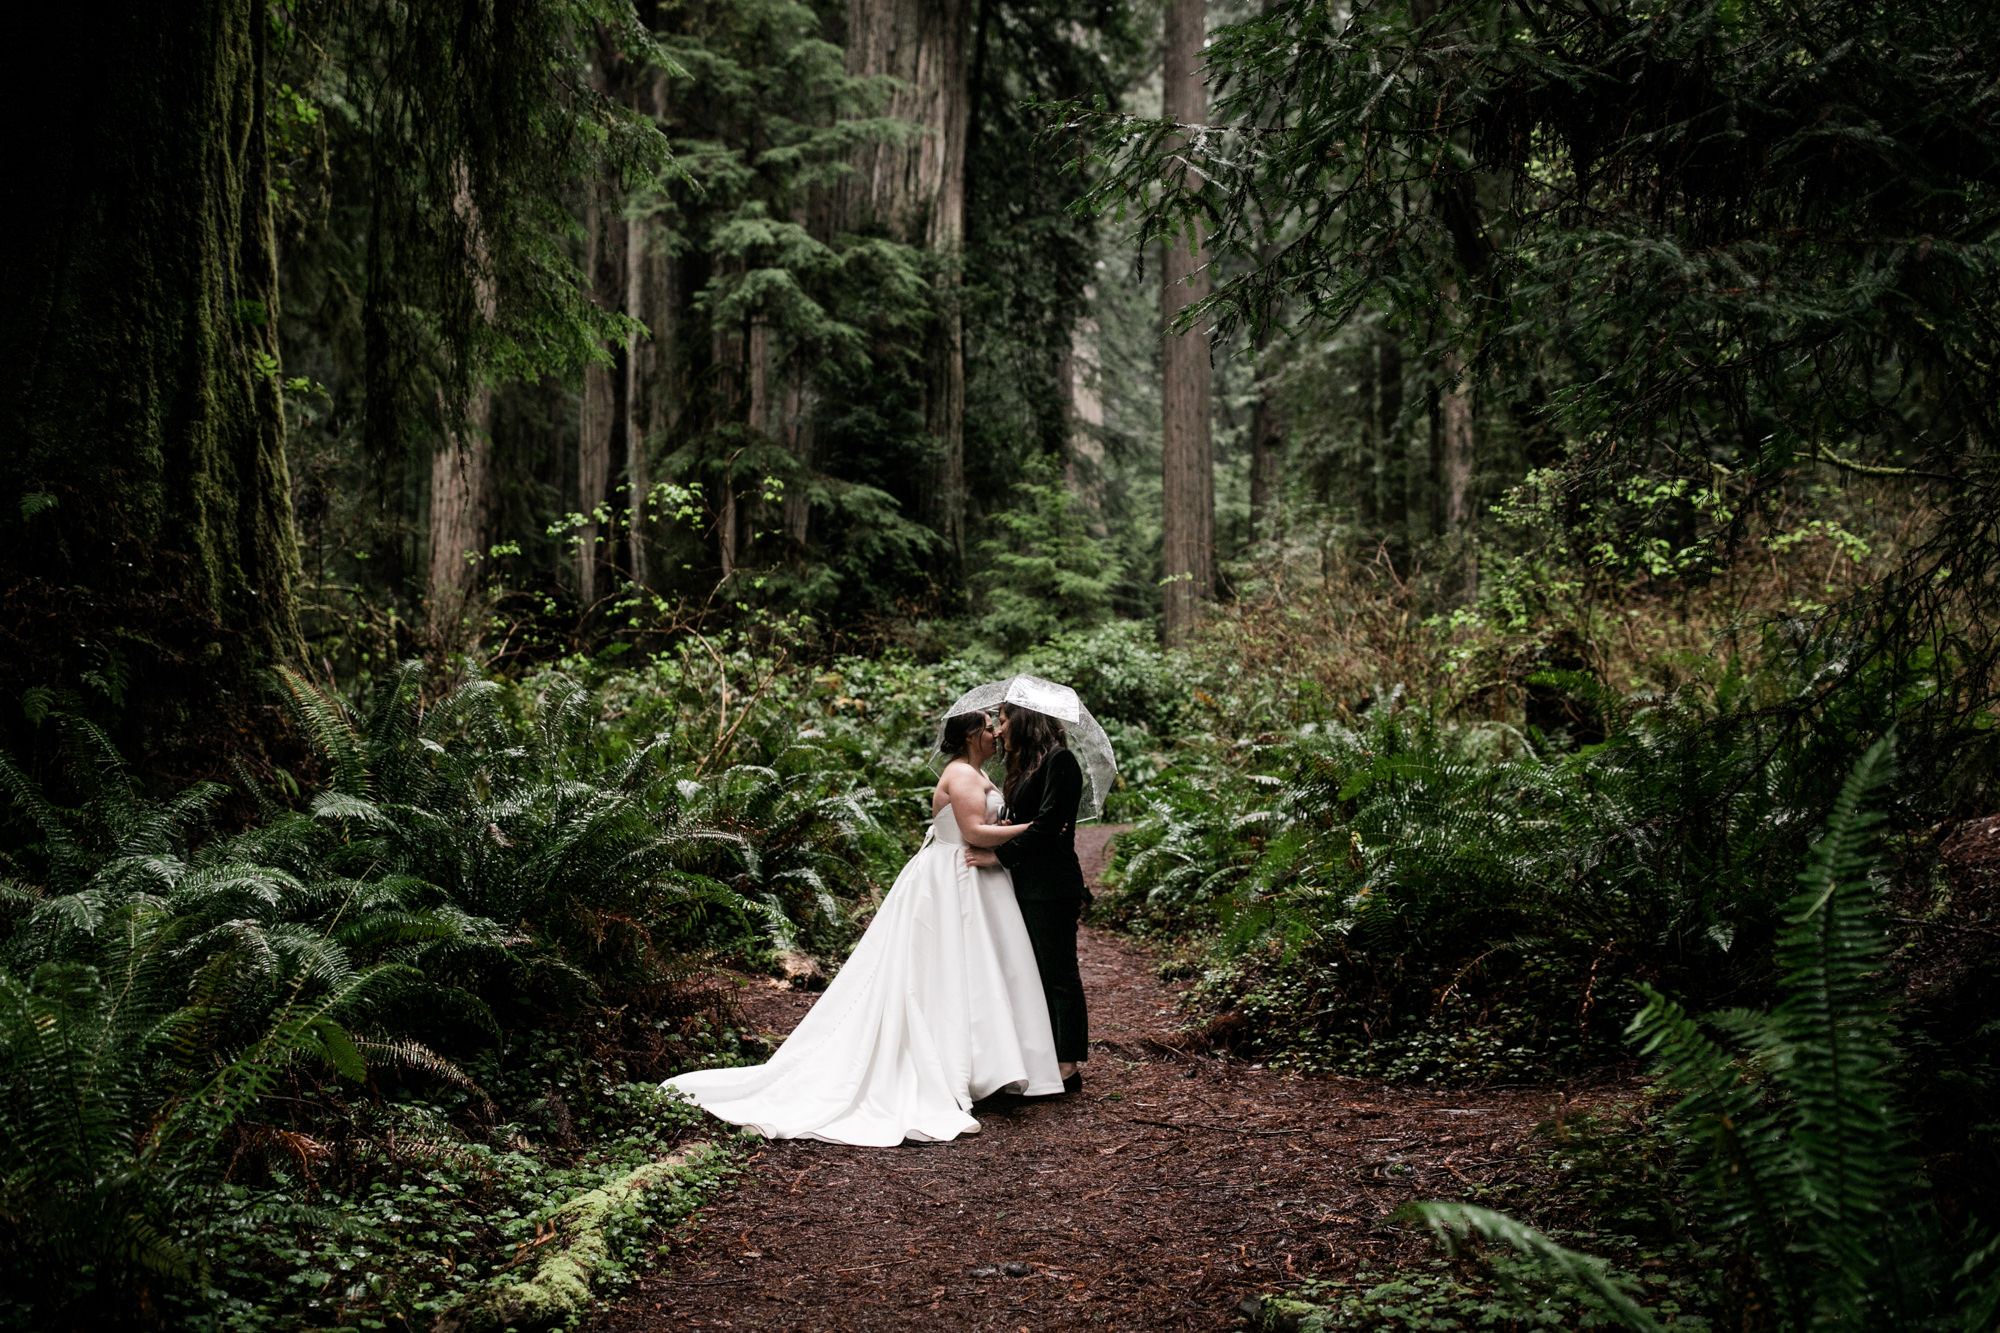 rainy elopement day in redwood national park